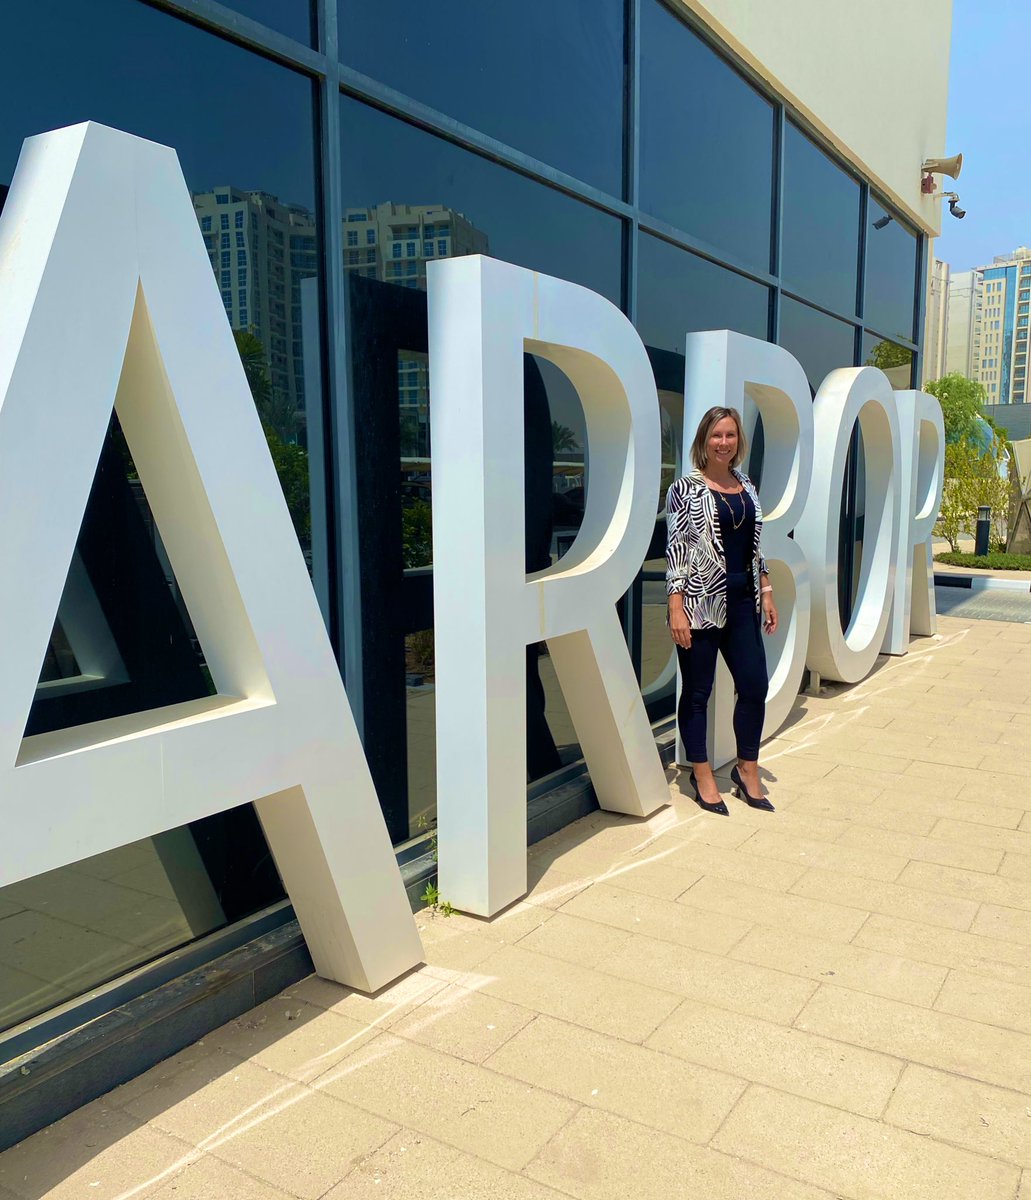 I am thrilled to have joined @arbor as Head of Secondary. Truly exciting times ahead as we prepare to open our doors to our Secondary School community. Can’t wait to meet all of our families soon! #arbordubai #newacademicyear #newbeginnings